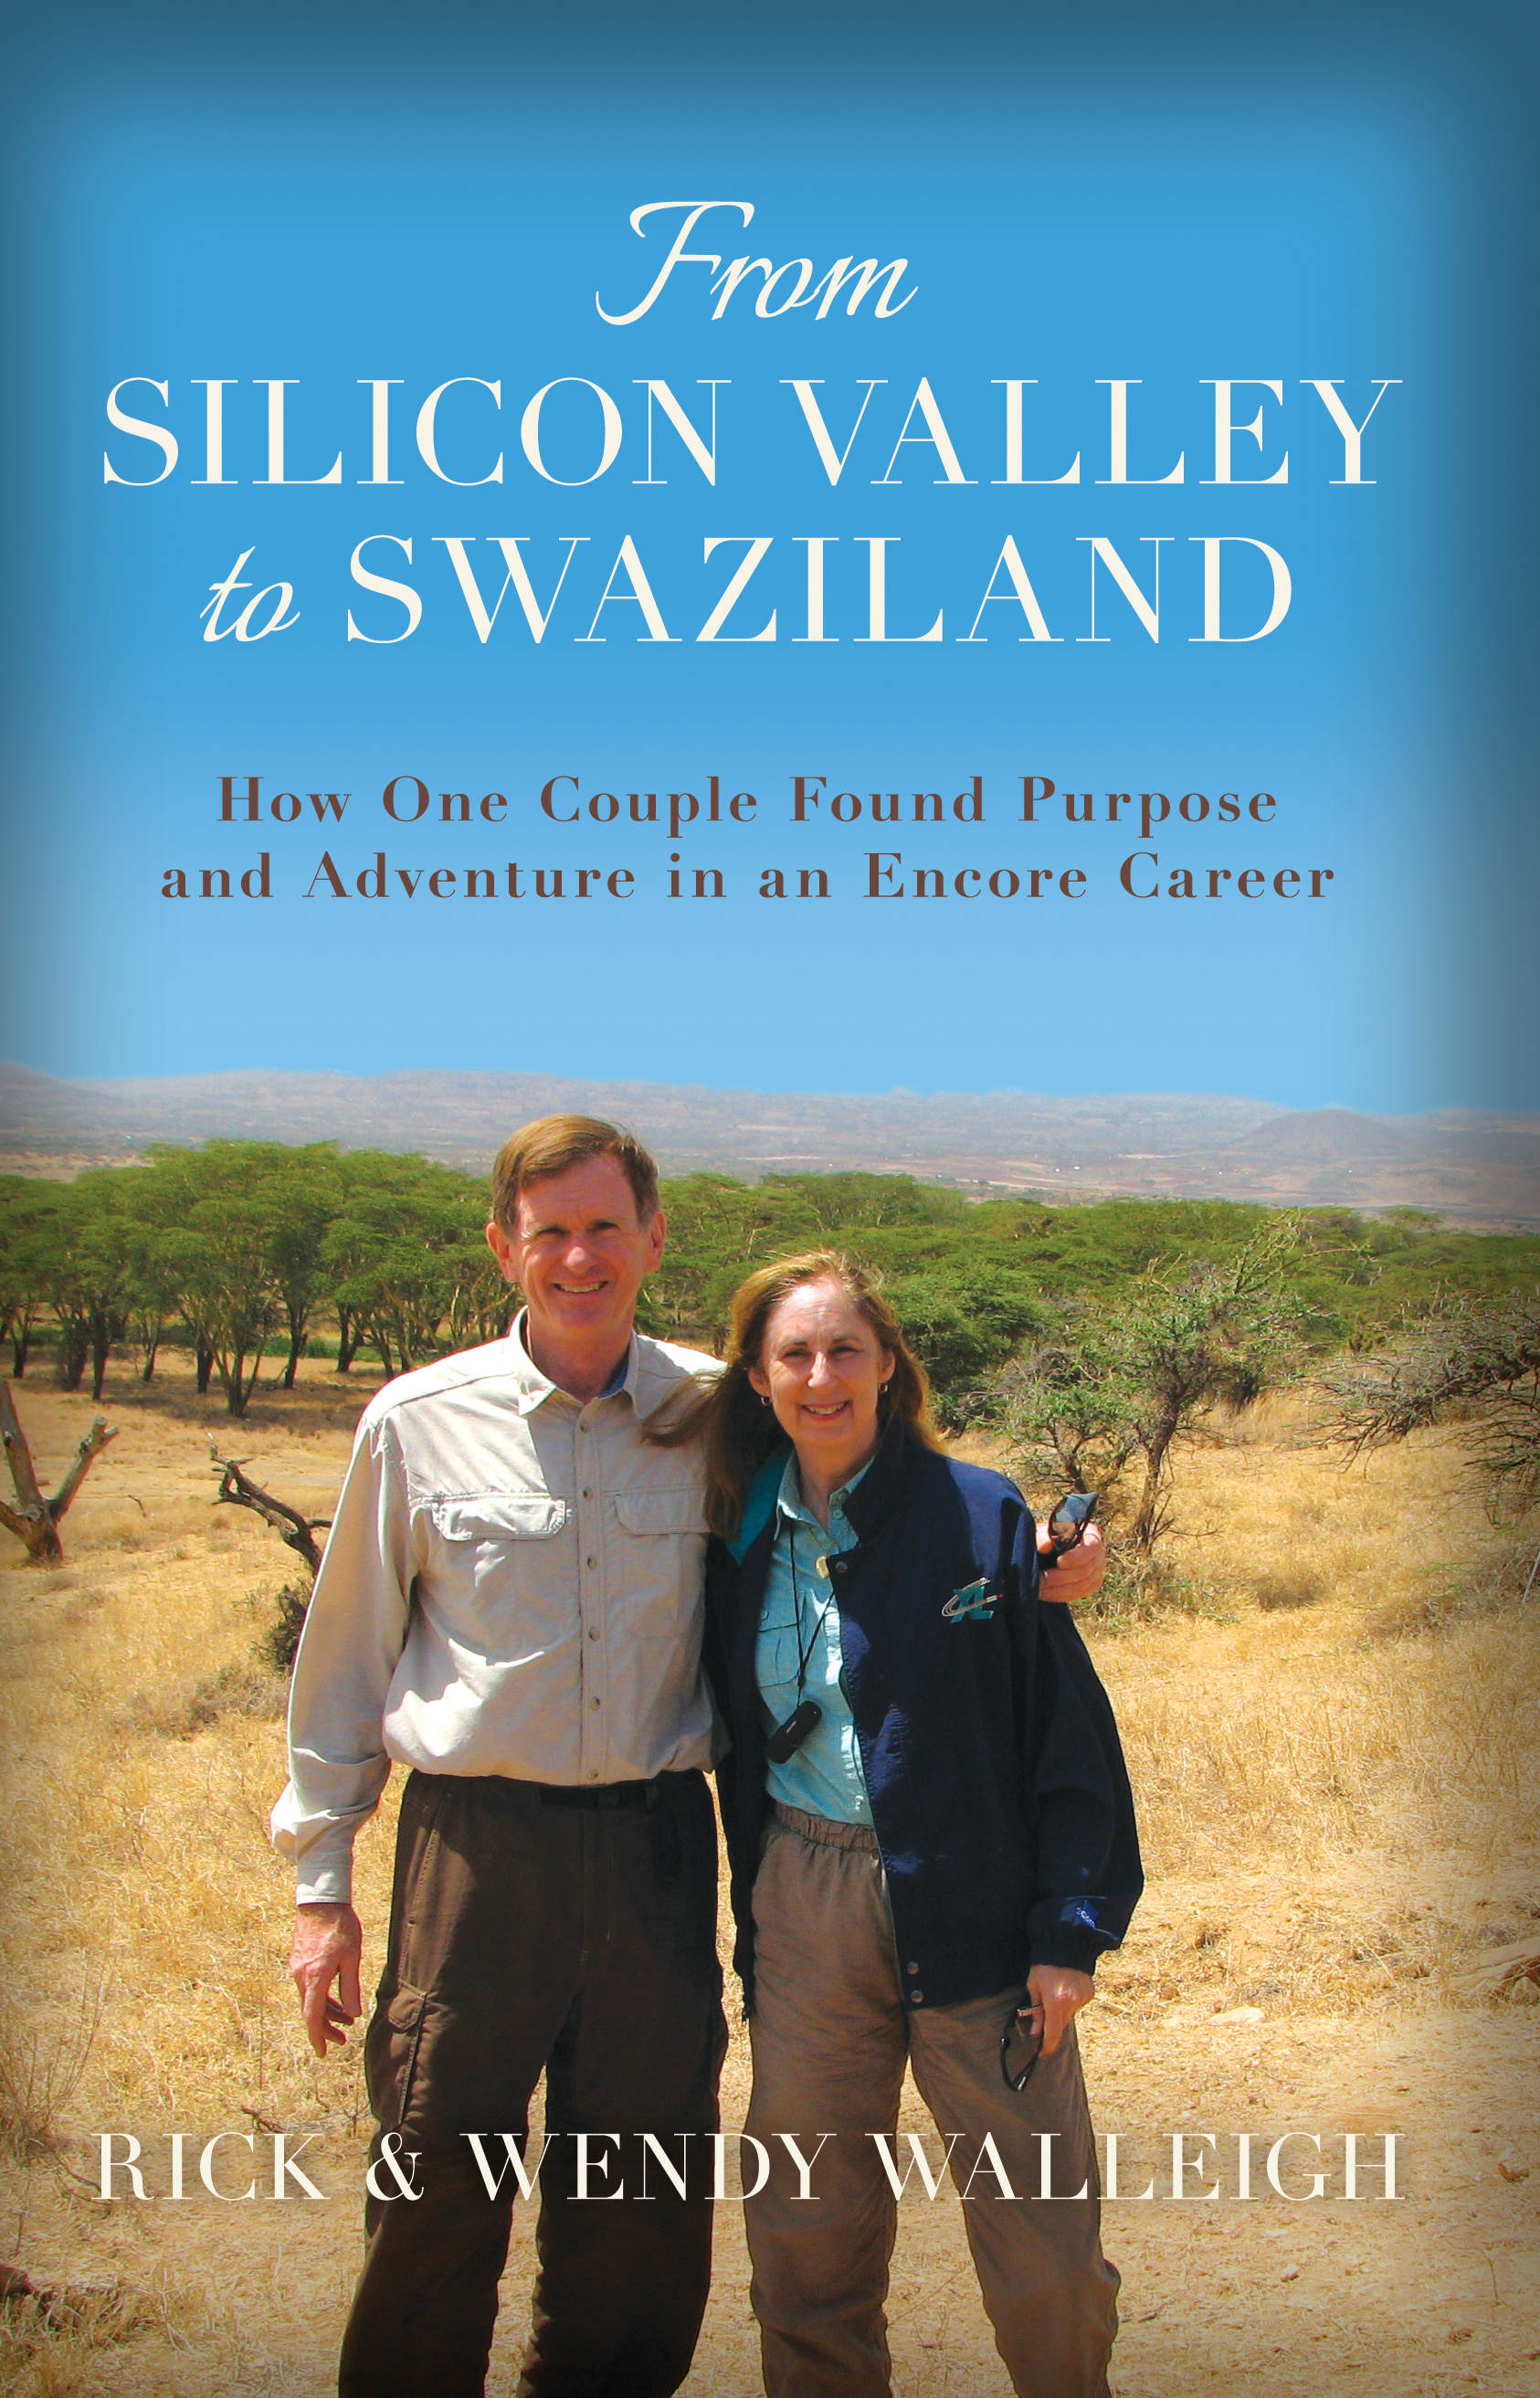 from silicon valley to swaziland: how i found purpose through